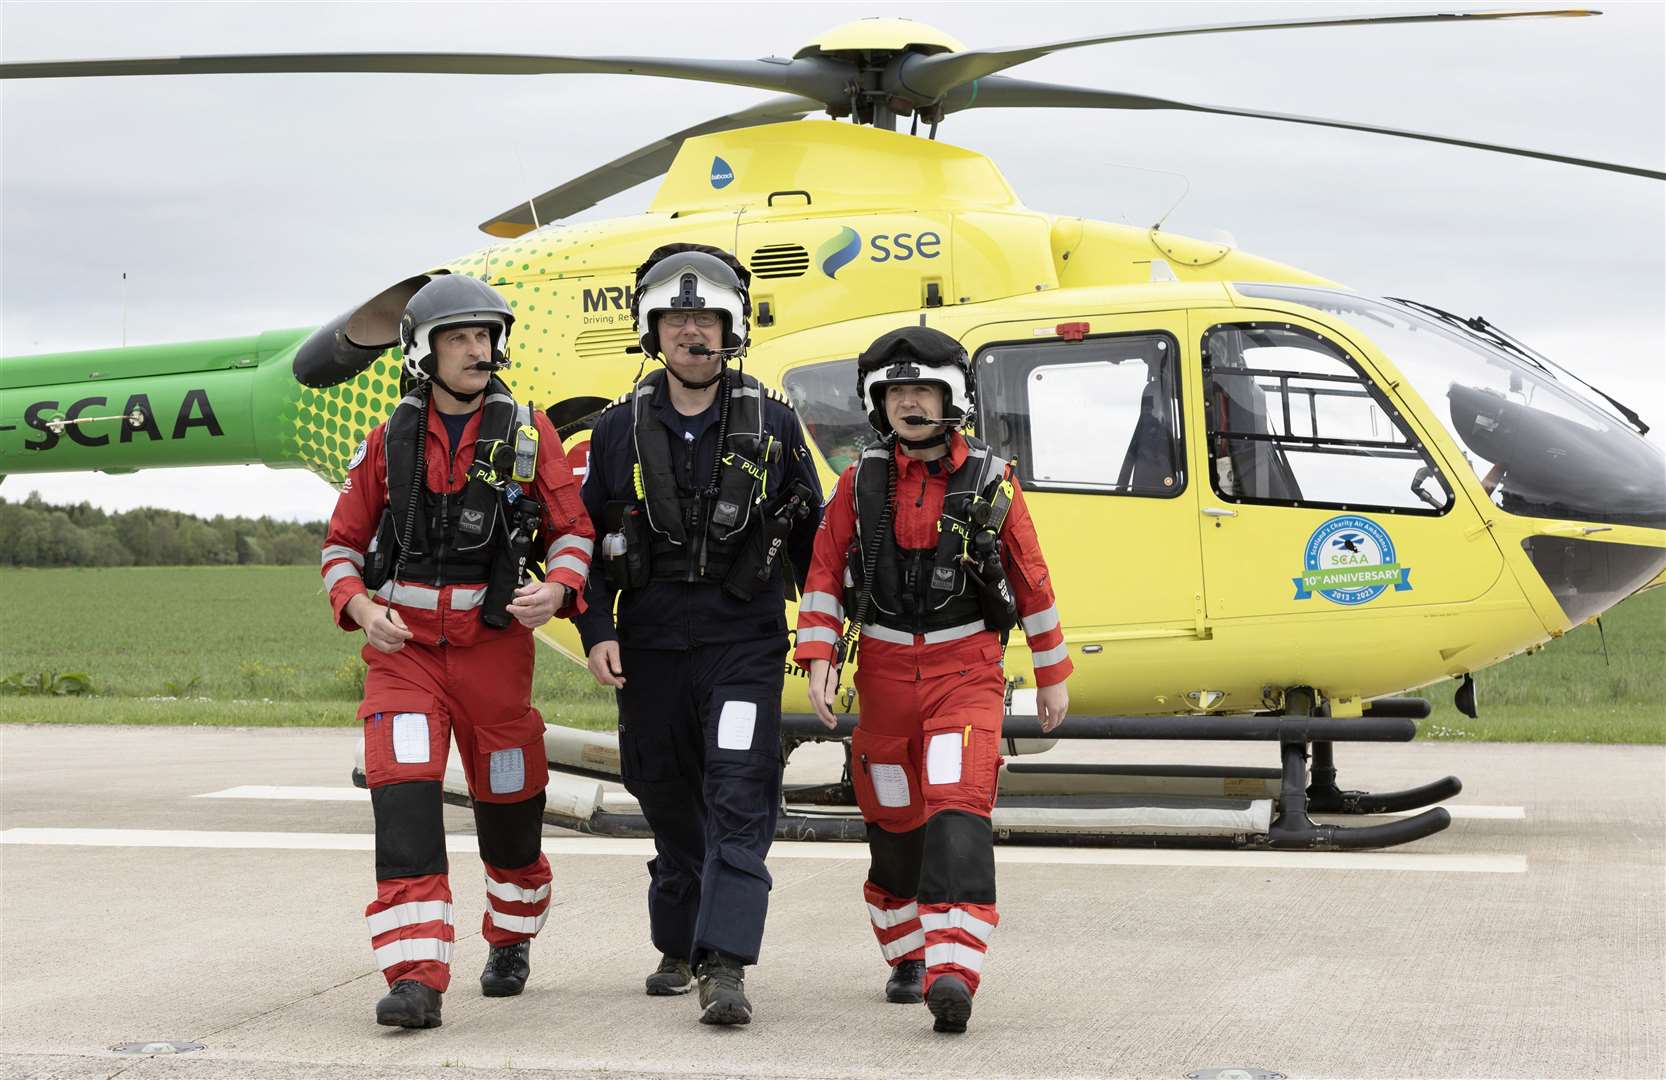 Scotland's Charity Air Ambulance (SCAA) marks its 10th anniversary. Pictured from left to right, the day's duty crew, Lead Paramedic John Pritchard, Pilot Captain Russell Myles and Paramedic Ali Daw. Picture: Graeme Hart